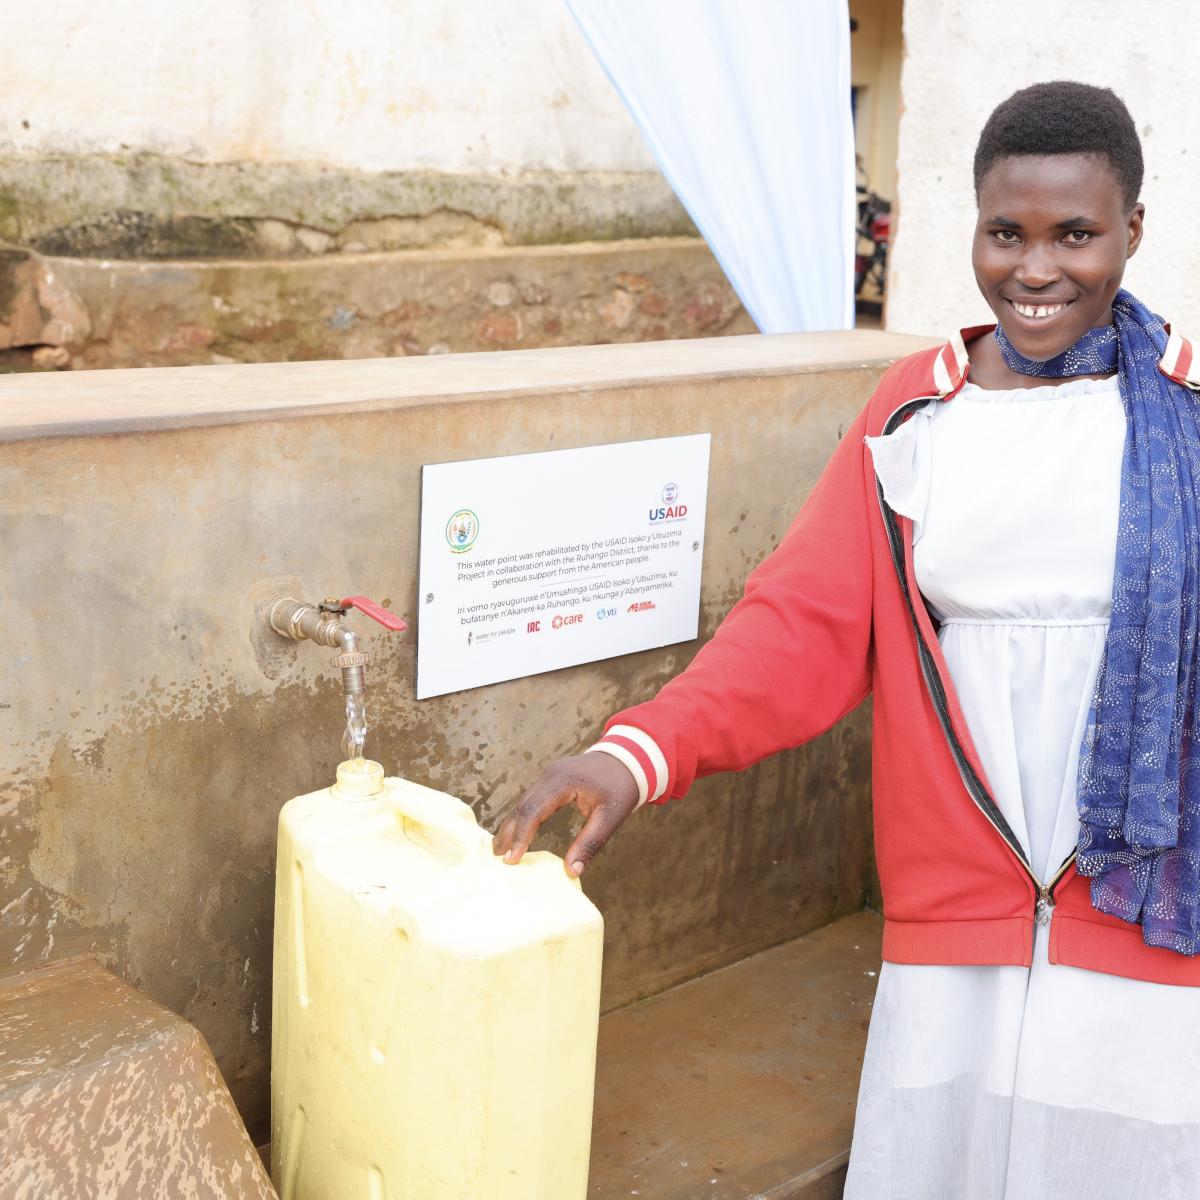 Woman smiling as she fills up her yellow canister full of clean water.